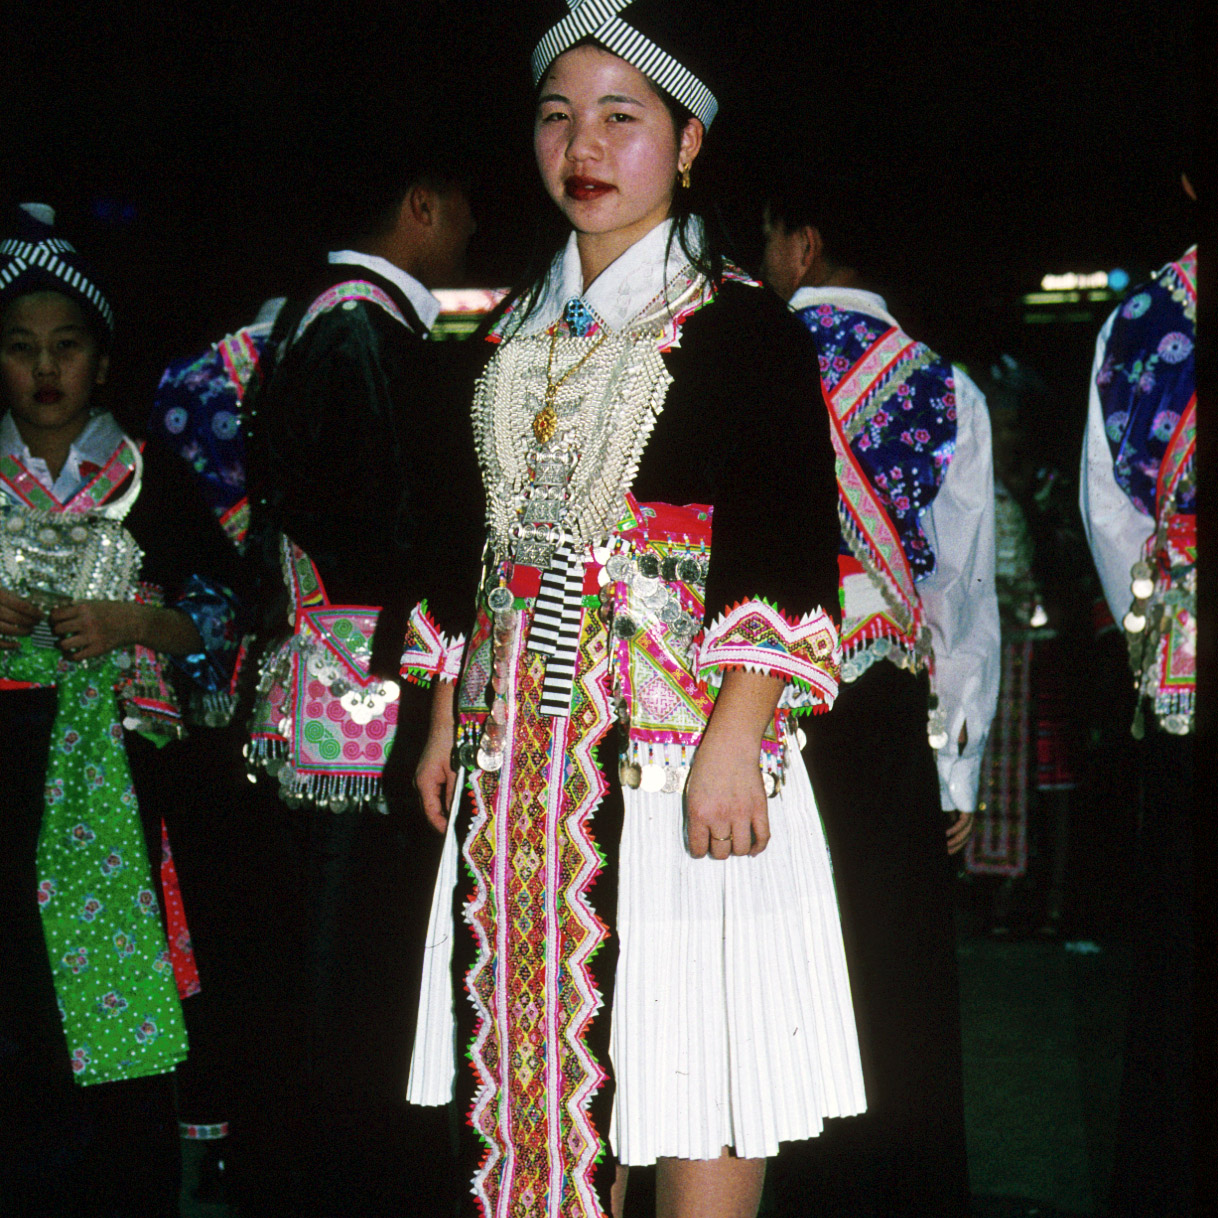 Redressing Tradition: Hmong Clothing in Minnesota articles on display at the opening